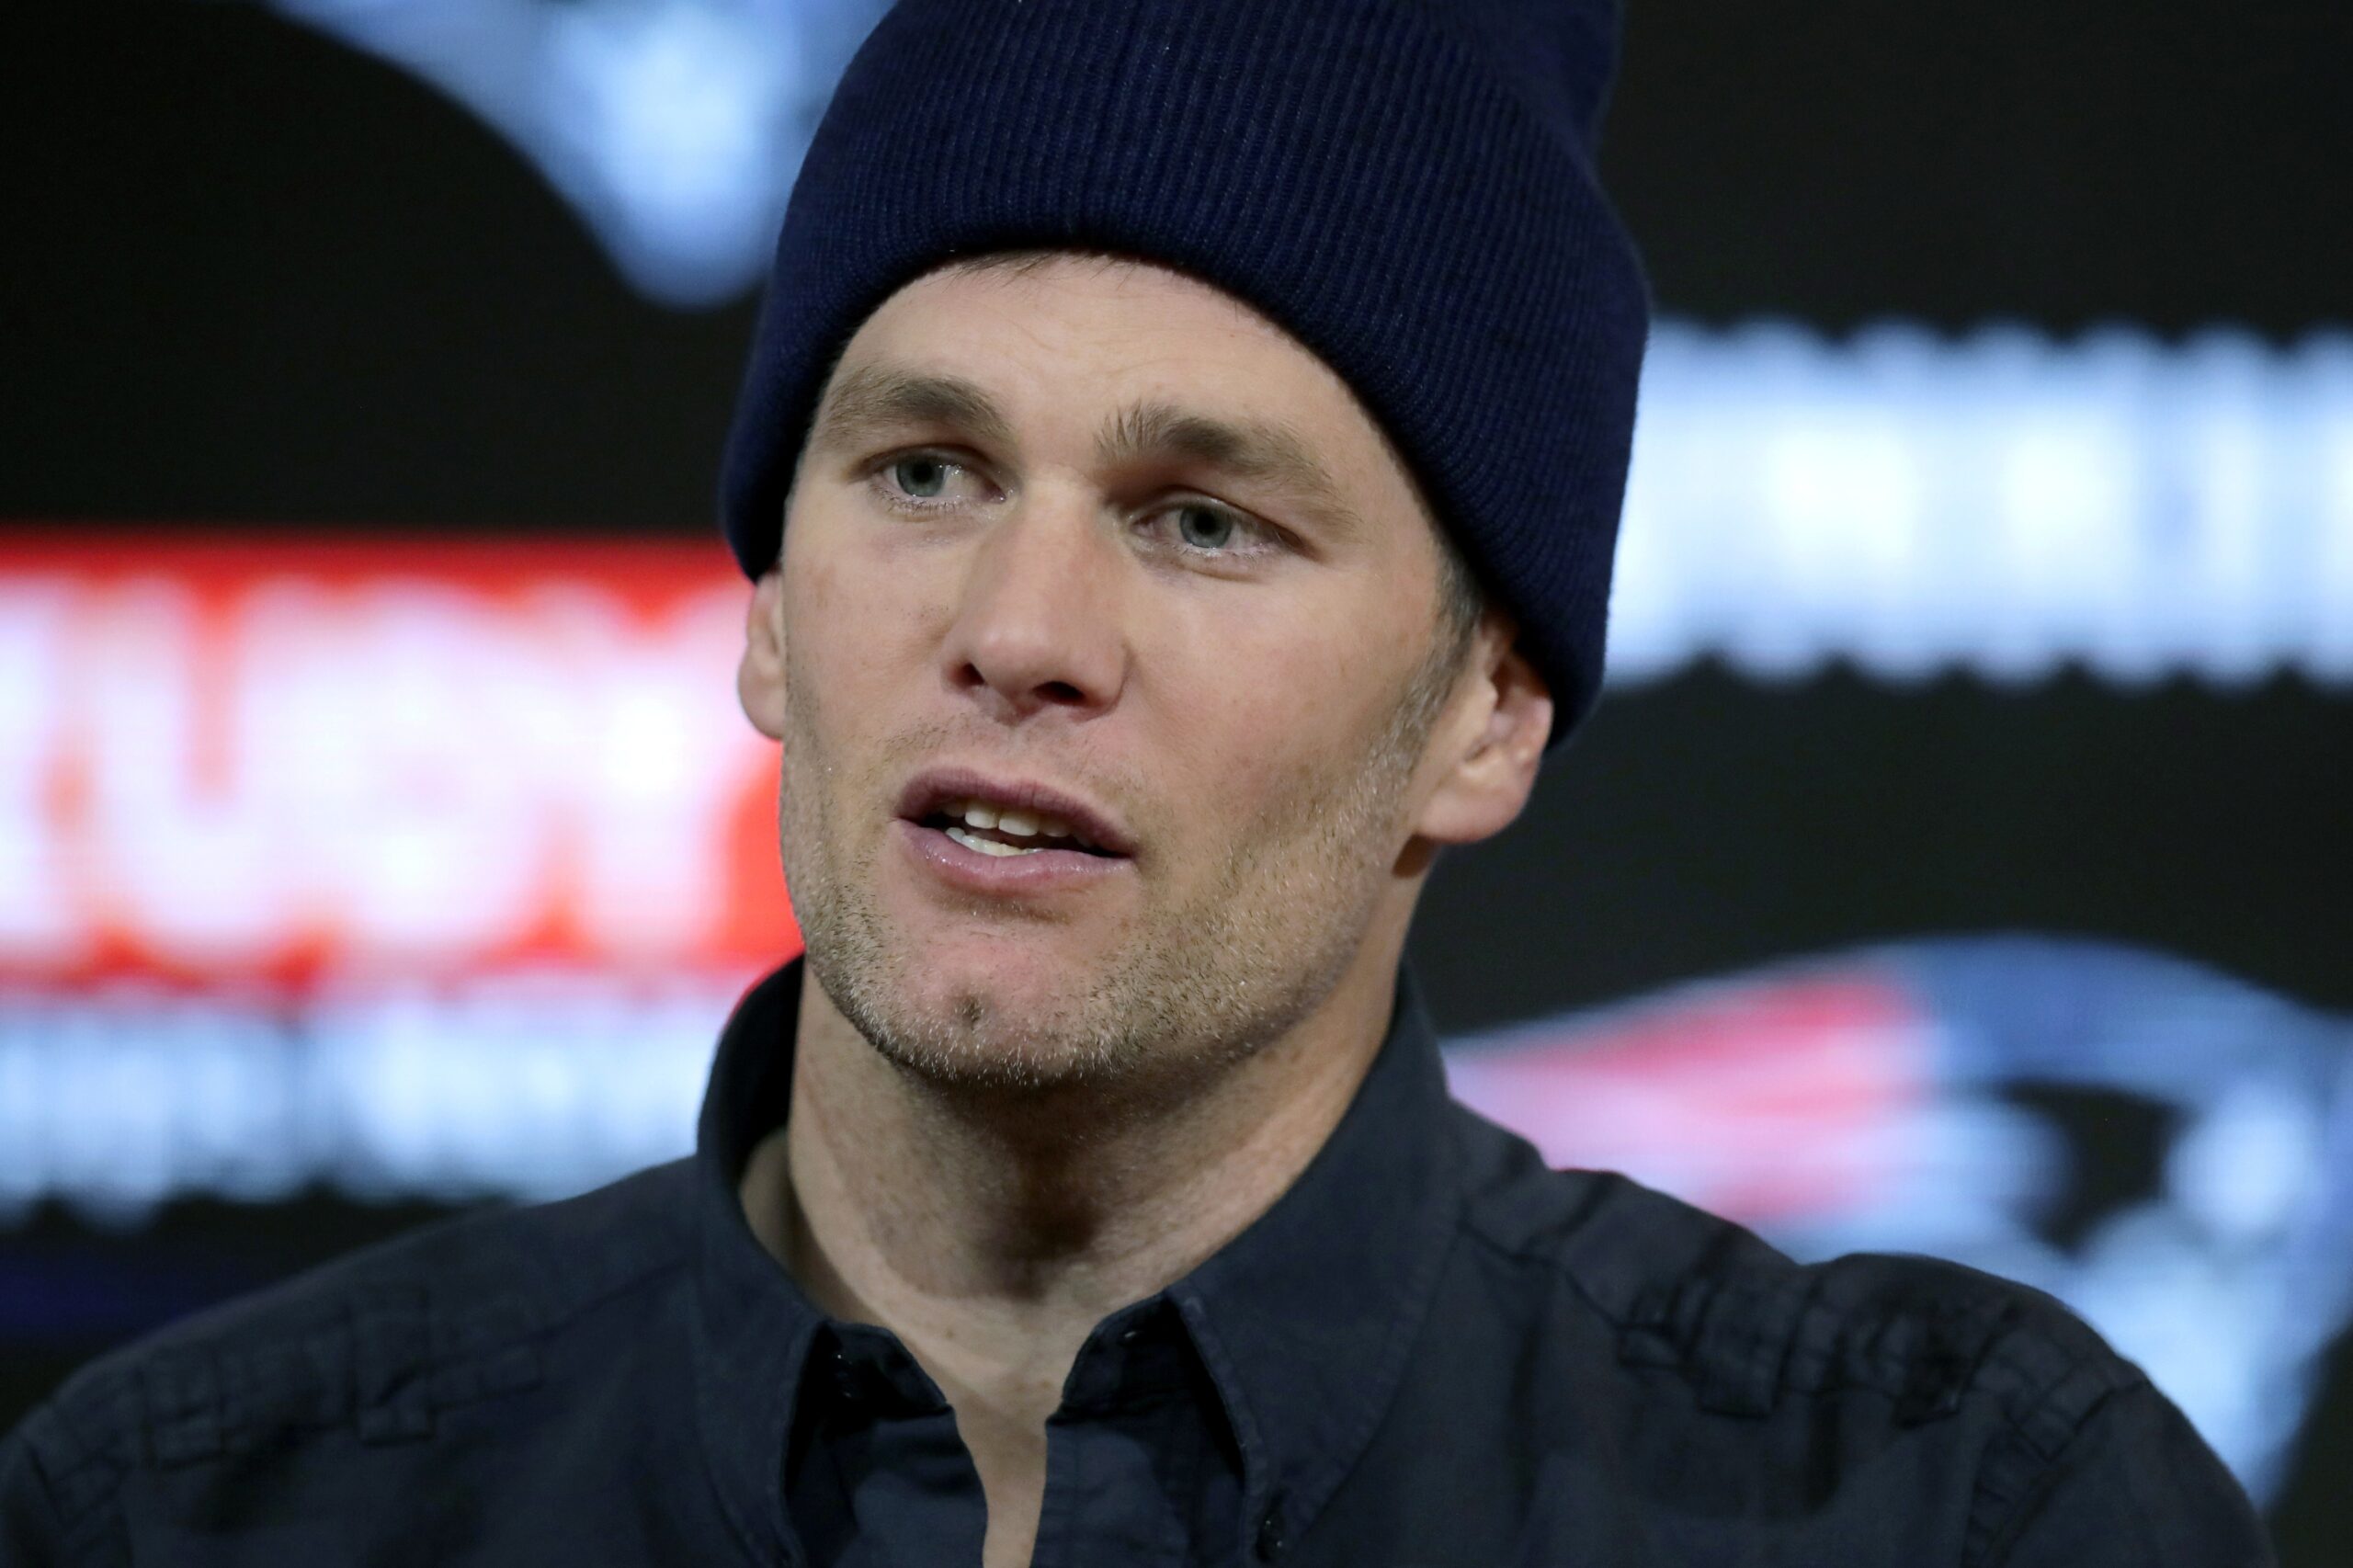 Tom Brady learning new playbook, excited to get started in Tampa